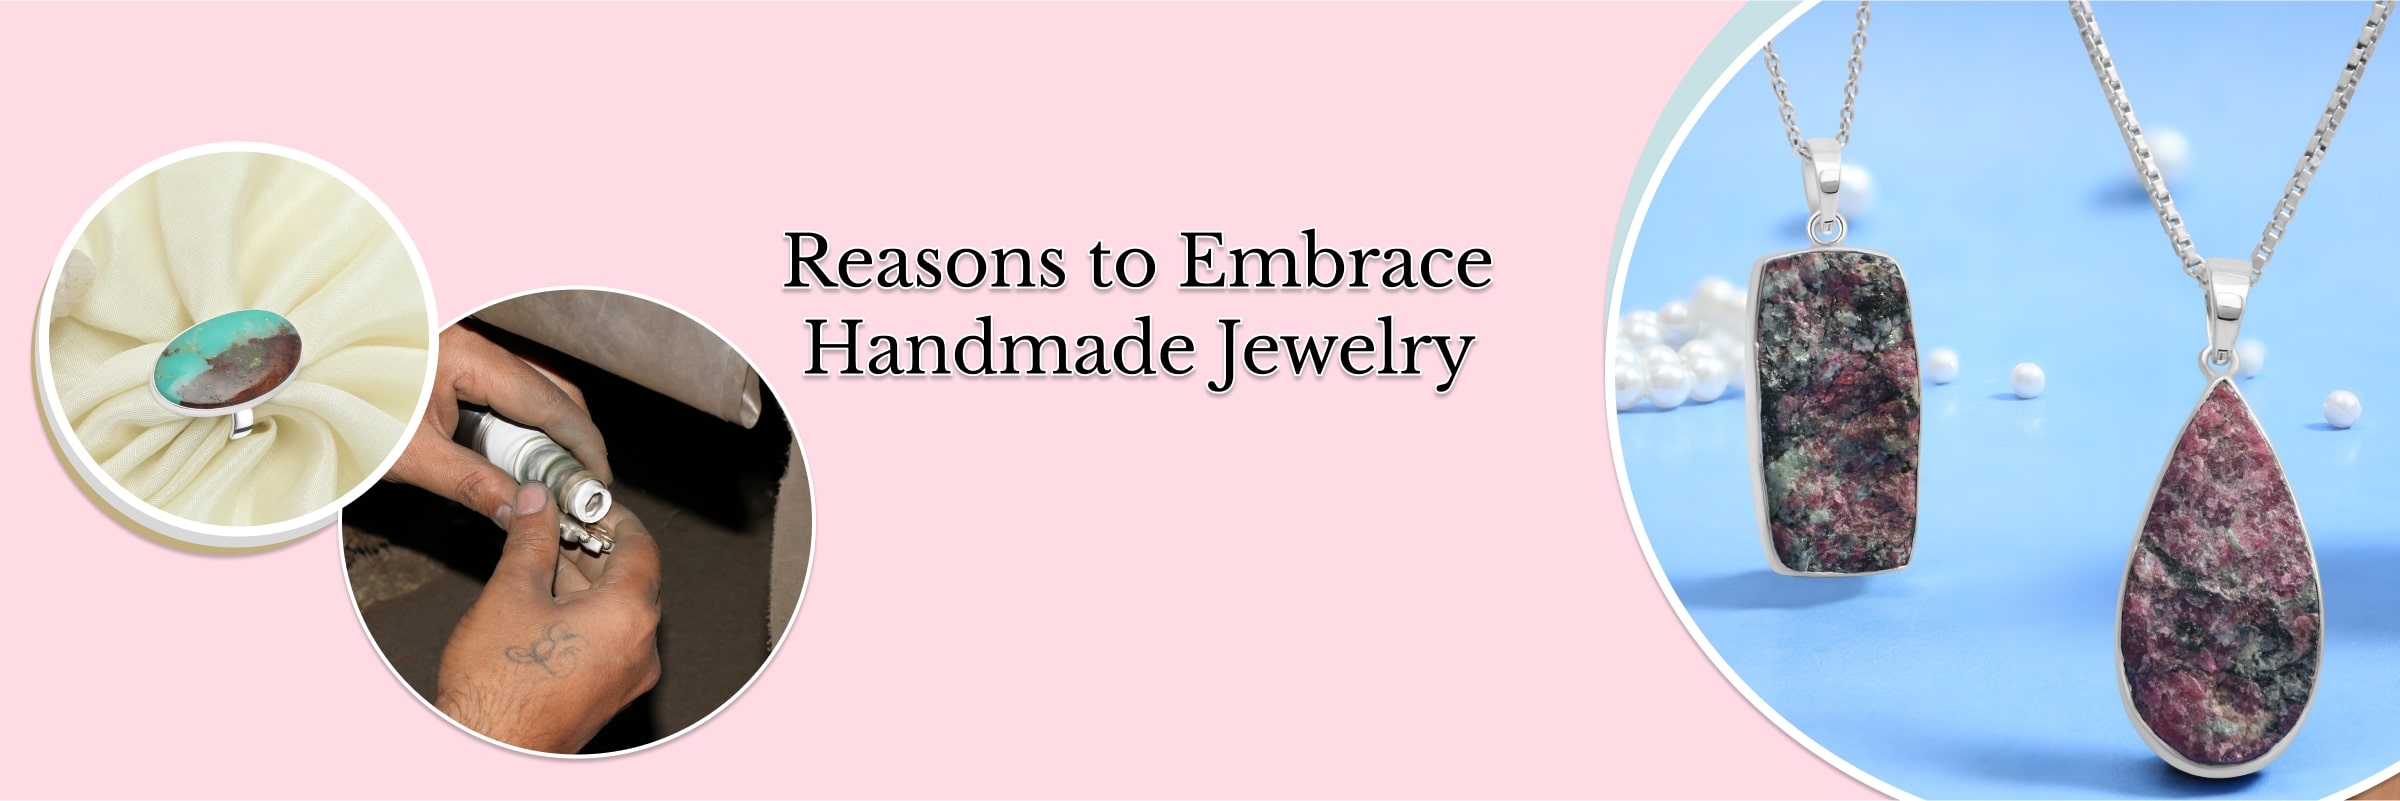 Why Should Handmade Jewelry Be a Part of Your Collection